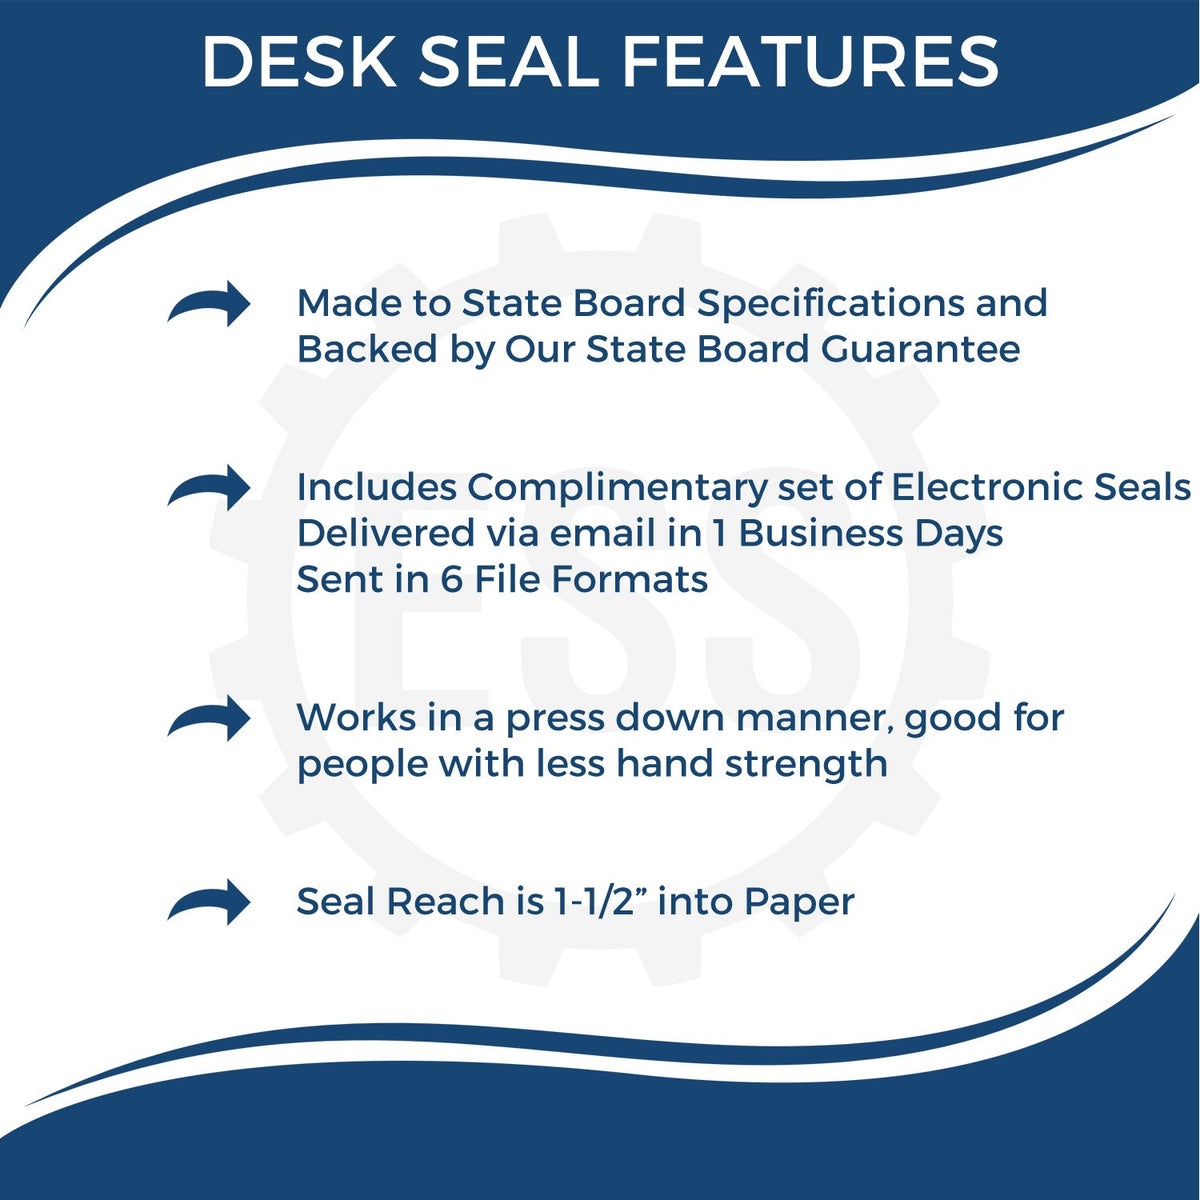 A picture of an infographic highlighting the selling points for the Missouri Geologist Desk Seal